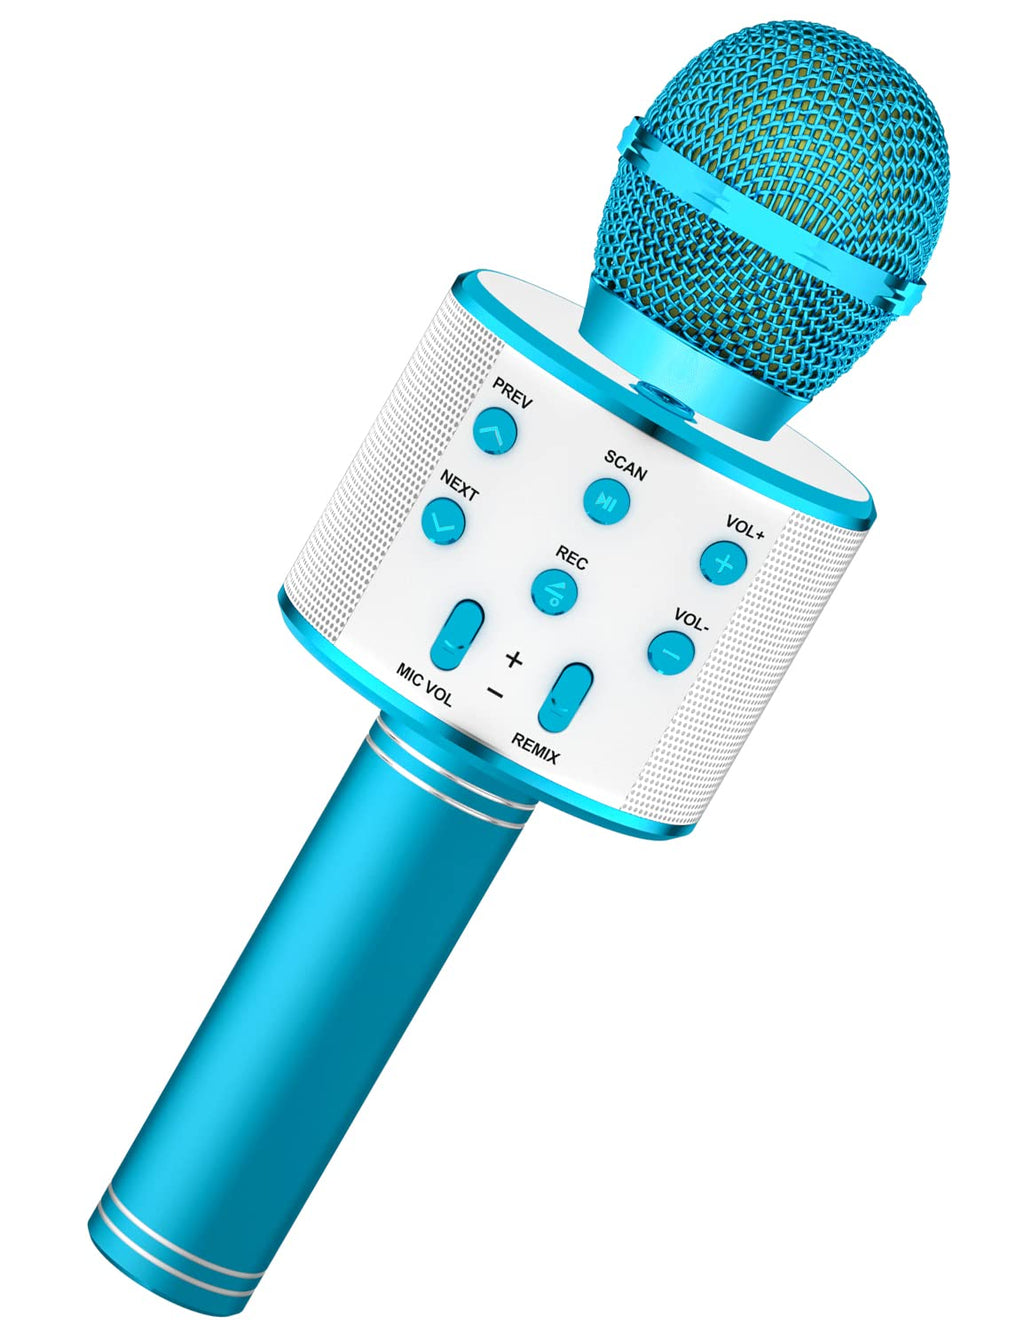 Amazmic Karaoke Microphone for Kids,Wireless Bluetooth Microphone for Singing, Handheld Microphone Portable Karaoke Machine Gift for Girls and Boys Adults Birthday Party, Home KTV(Blue) Blue